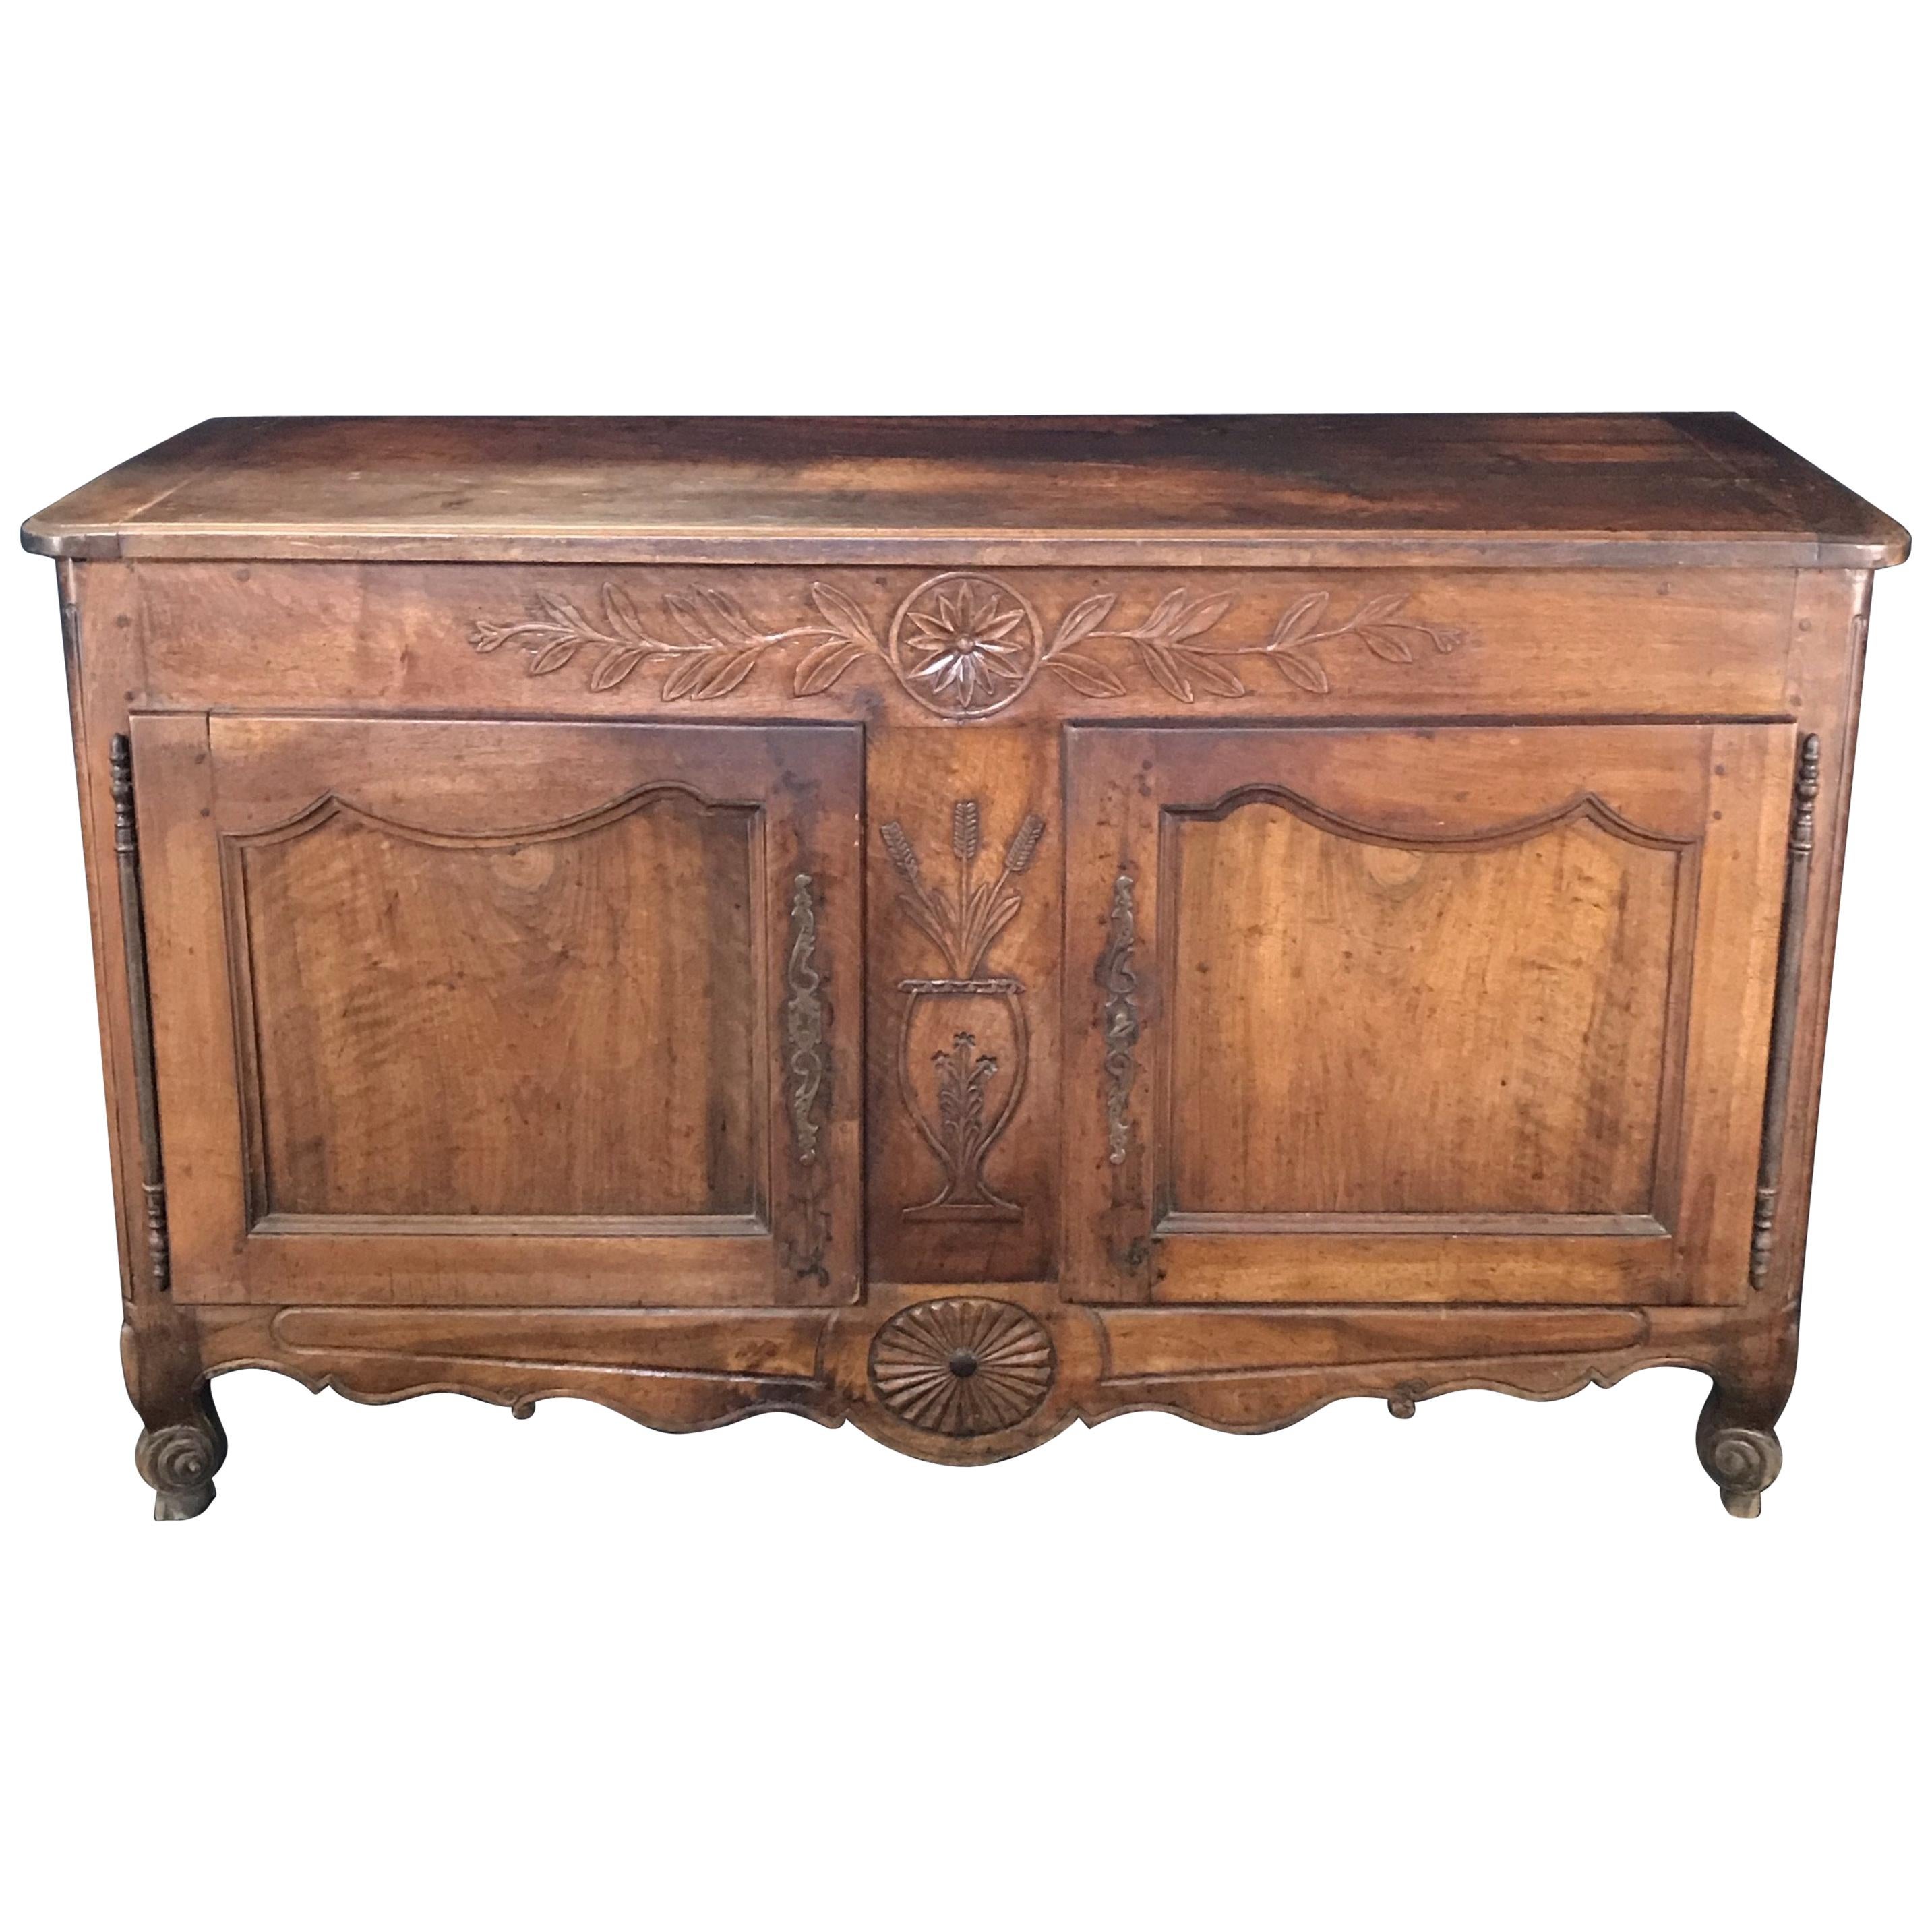 Charming Antique Carved Walnut French Provincial Sideboard Cabinet Buffet